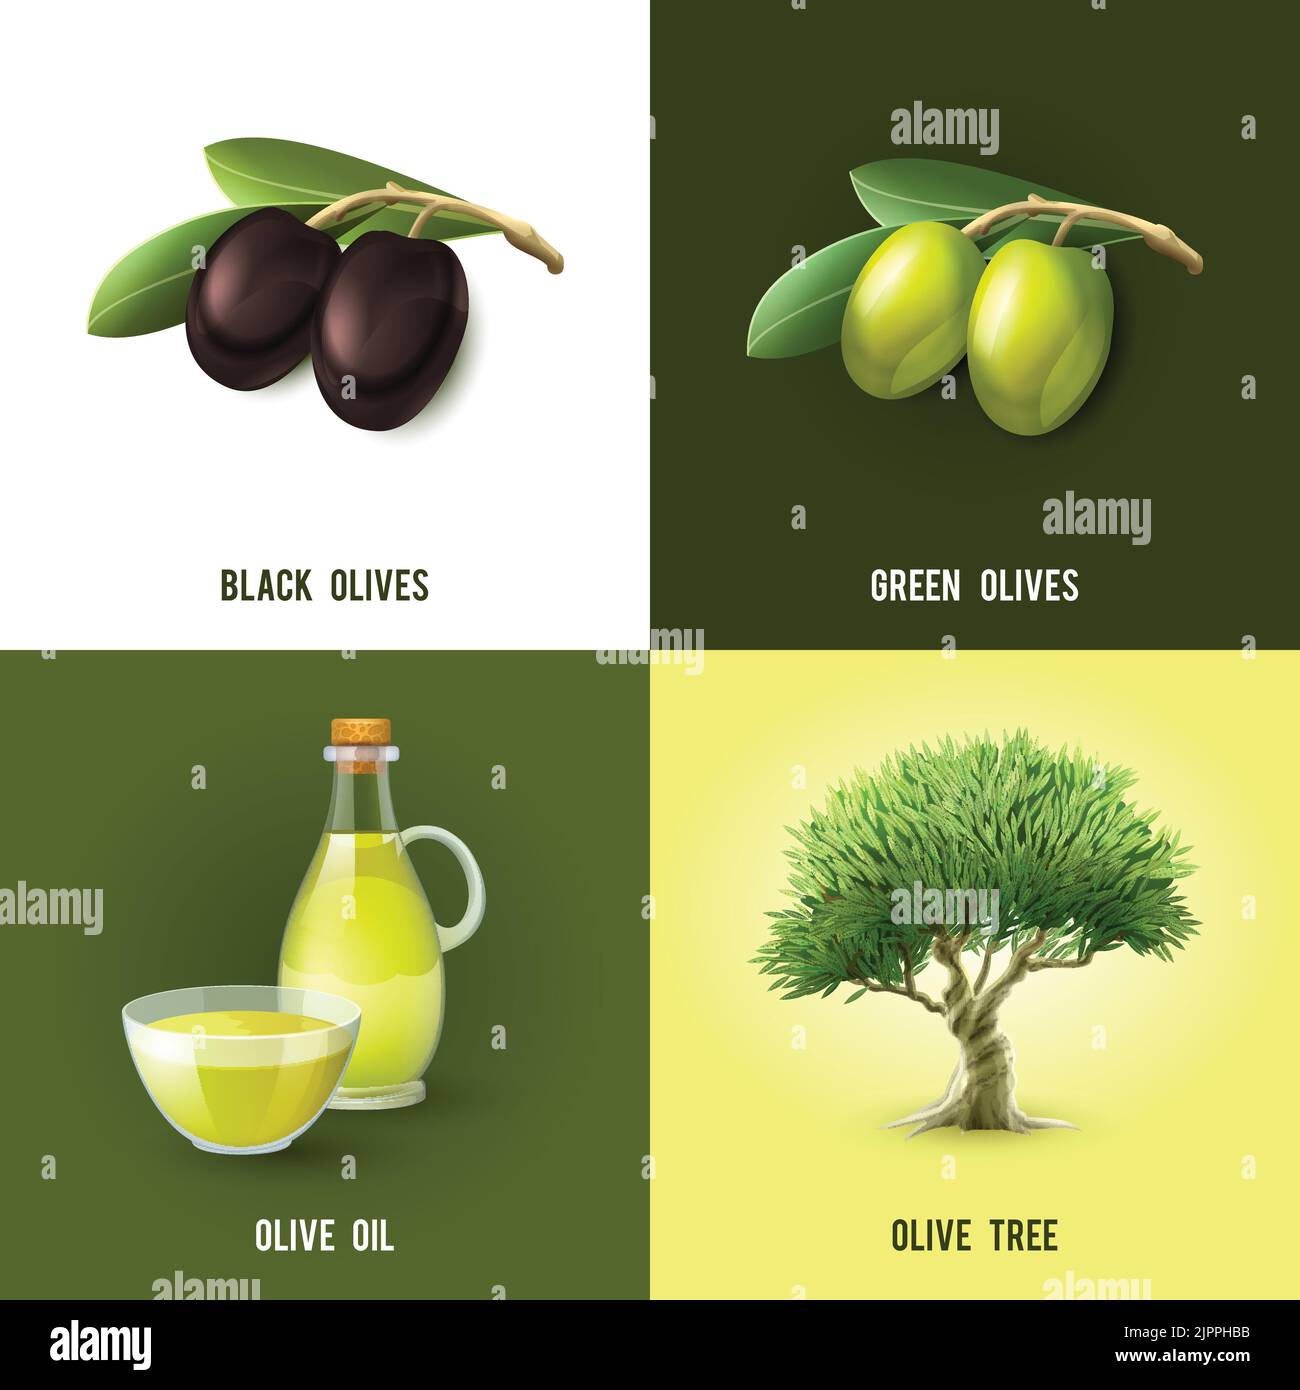 Olive design concept set with black and green olives oil and tree icons isolated vector illustration Stock Vector